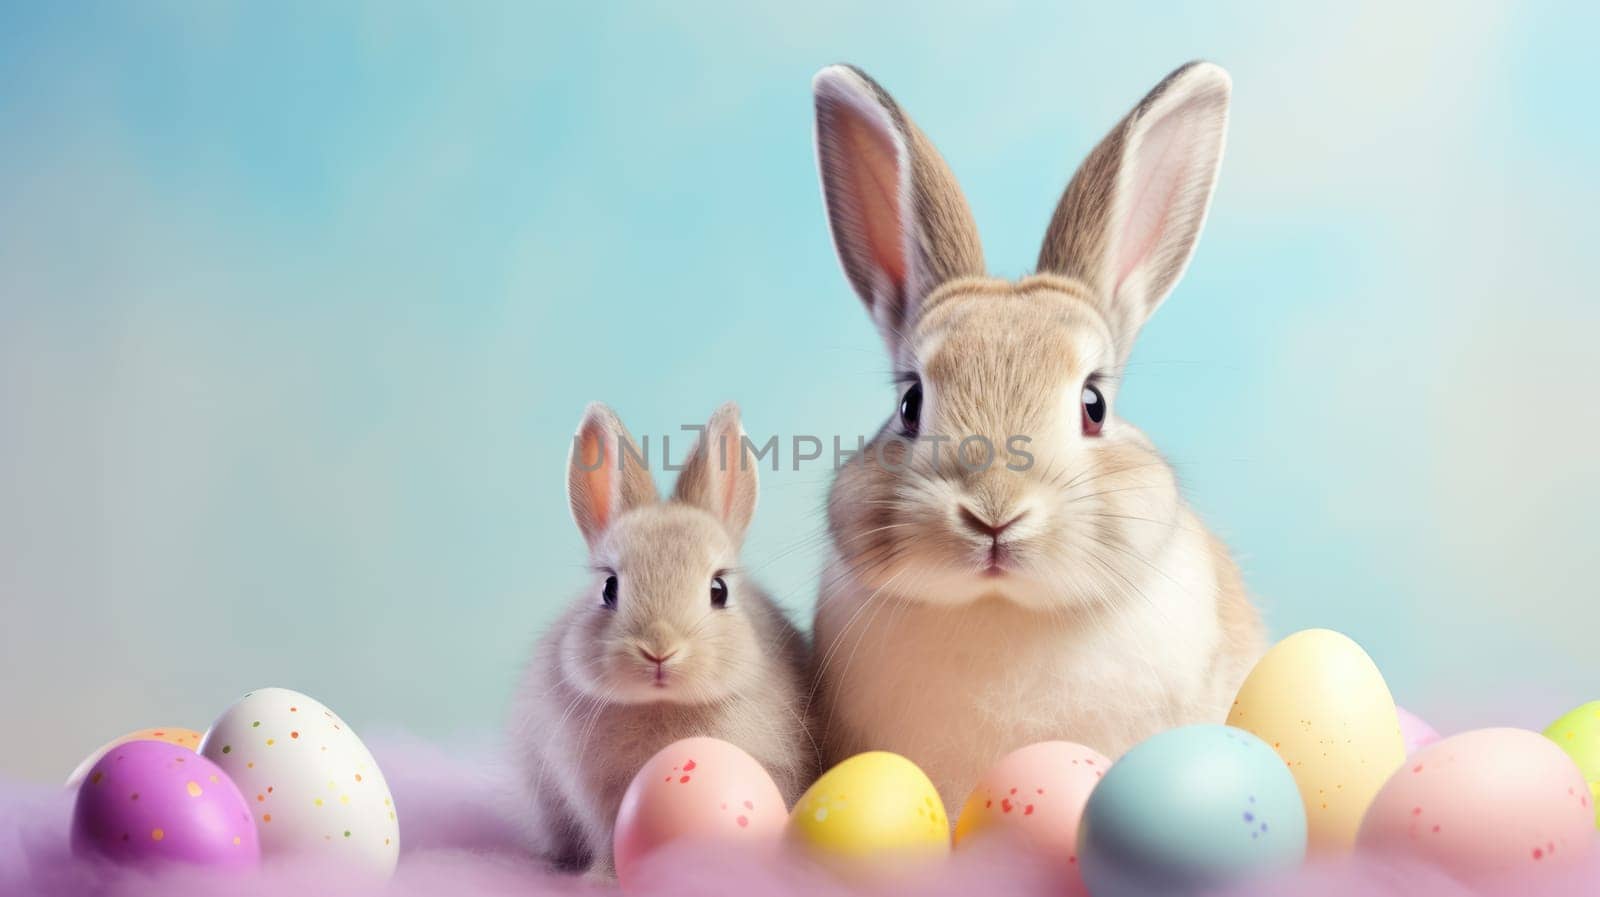 Two cute rabbits posing together, one sitting upright with perked ears, the other with folded ears beside. Both looking at the camera. Soft blue background with clouds.